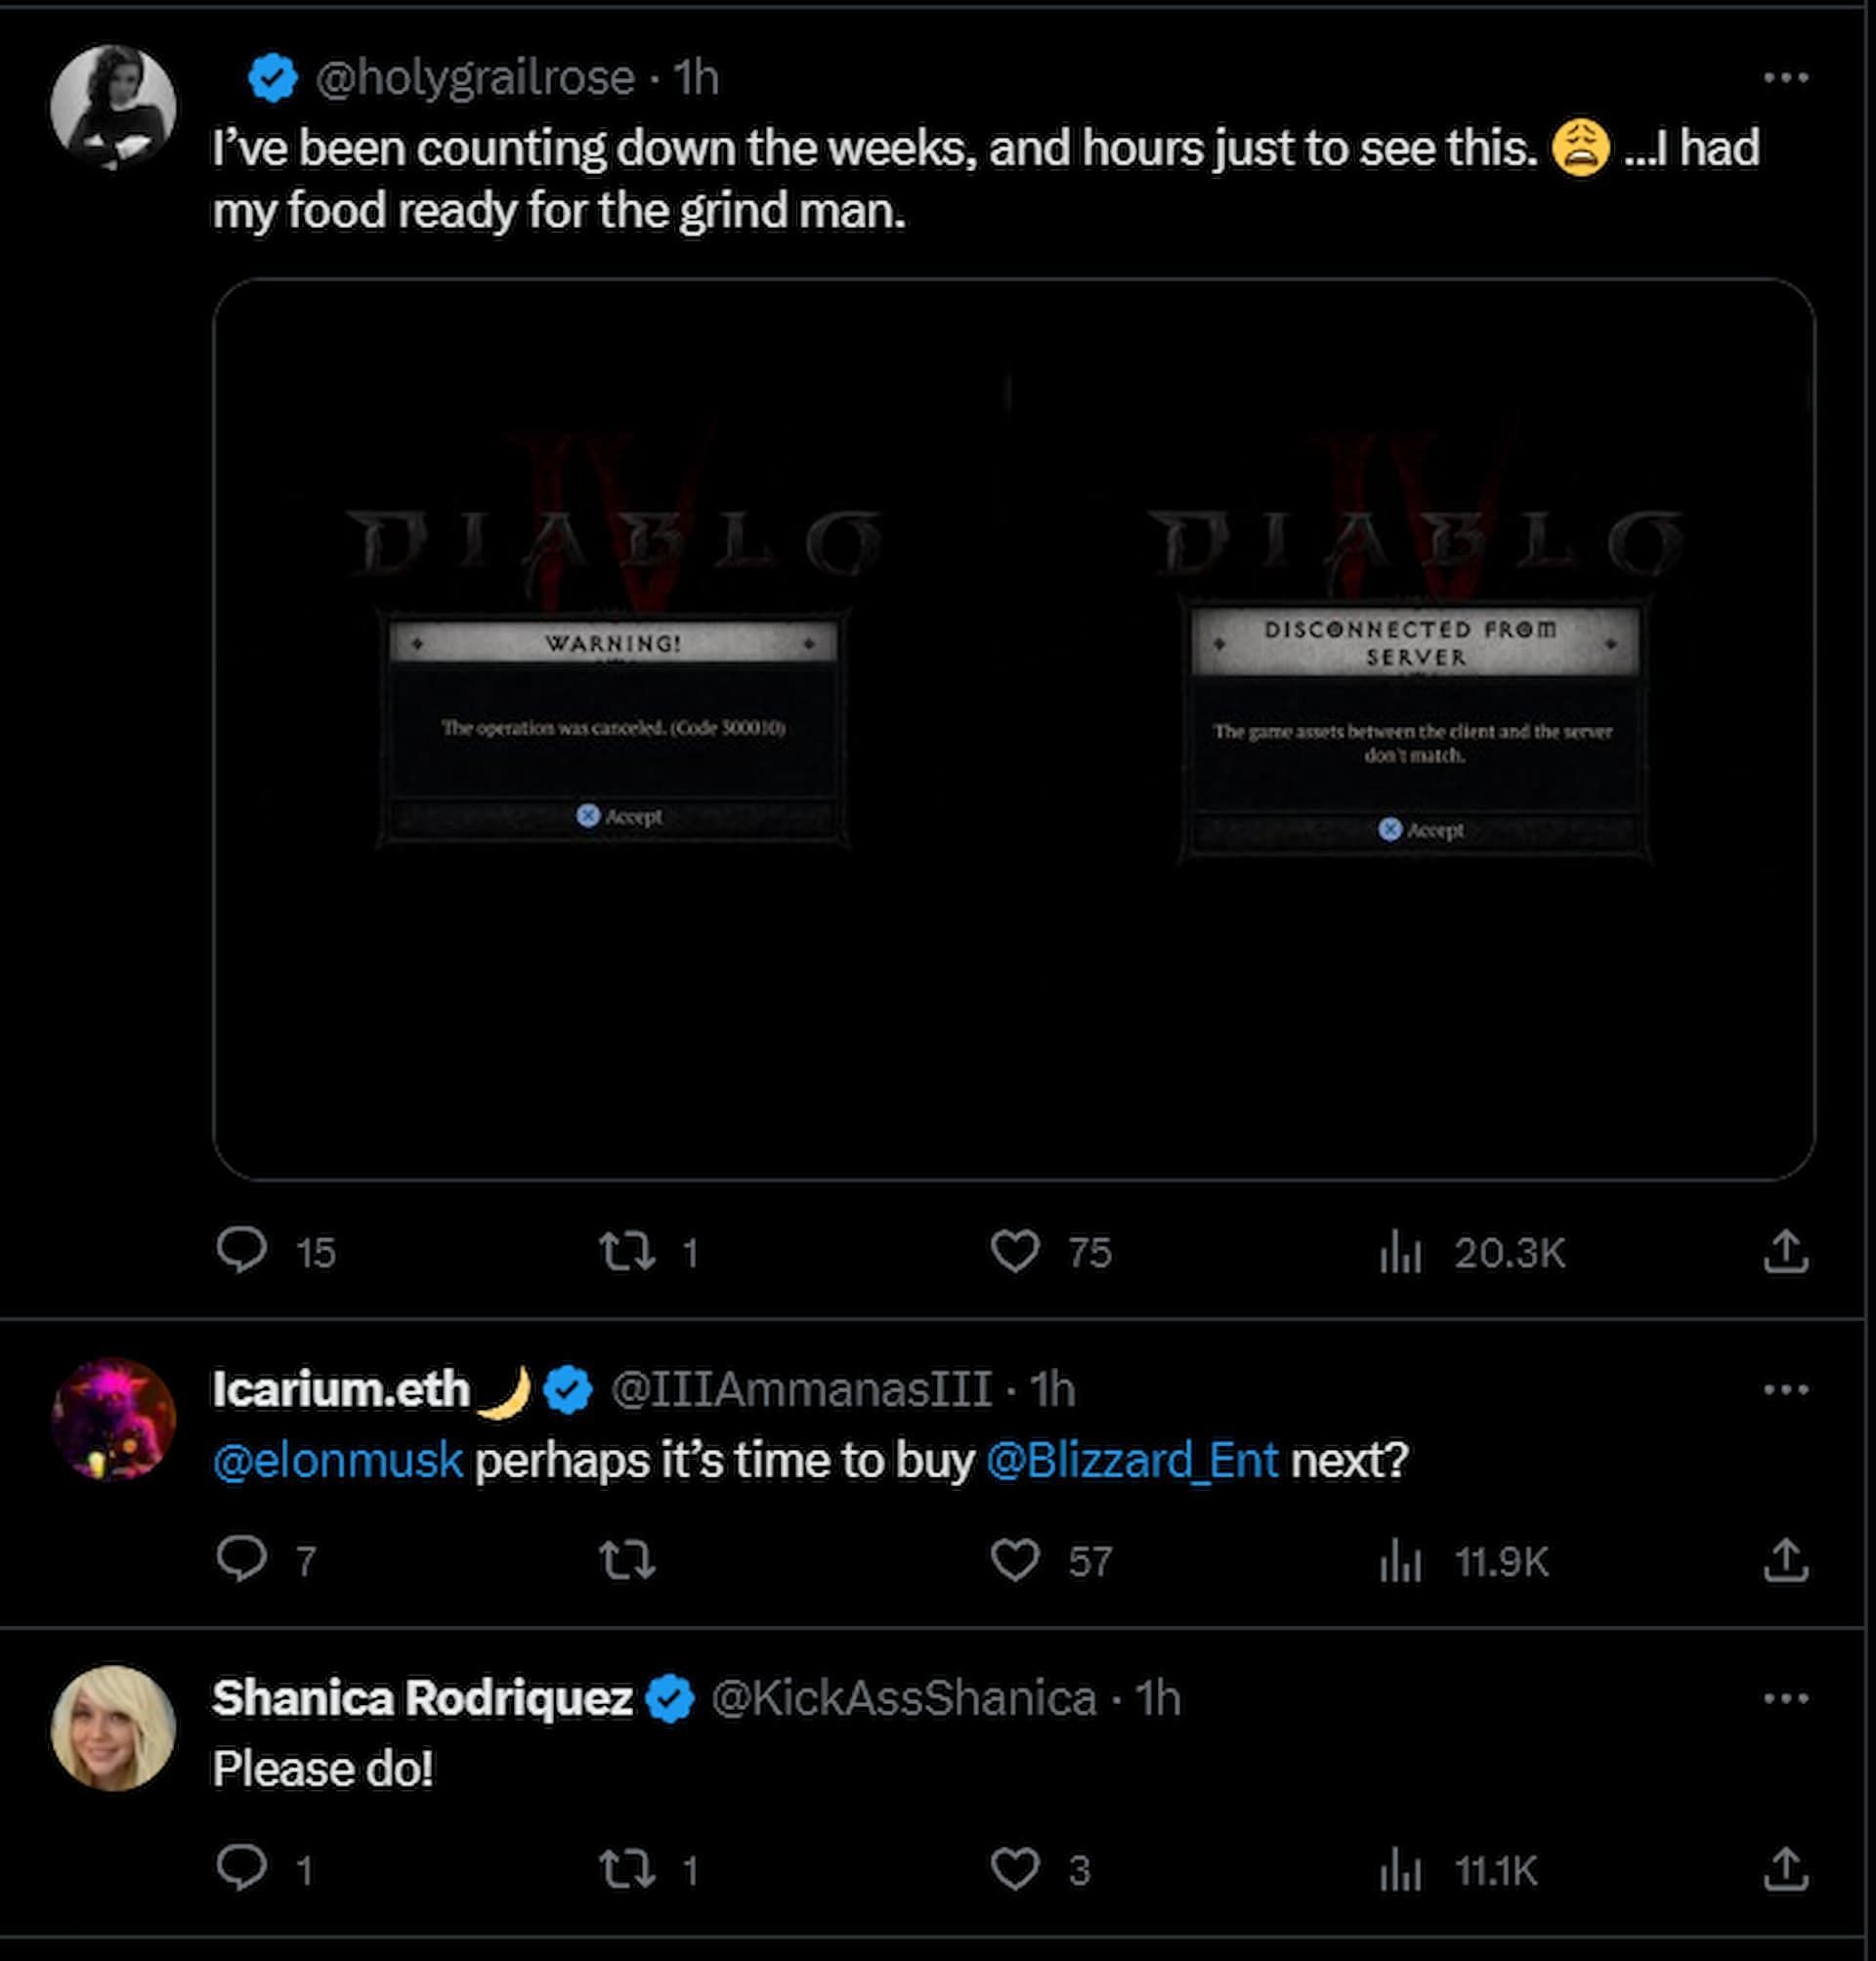 Players have also called upon Elon Musk to purchase Blizzard Entertainment following a failed Diablo 4 Season 2 launch (Screenshot by Sportskeeda)